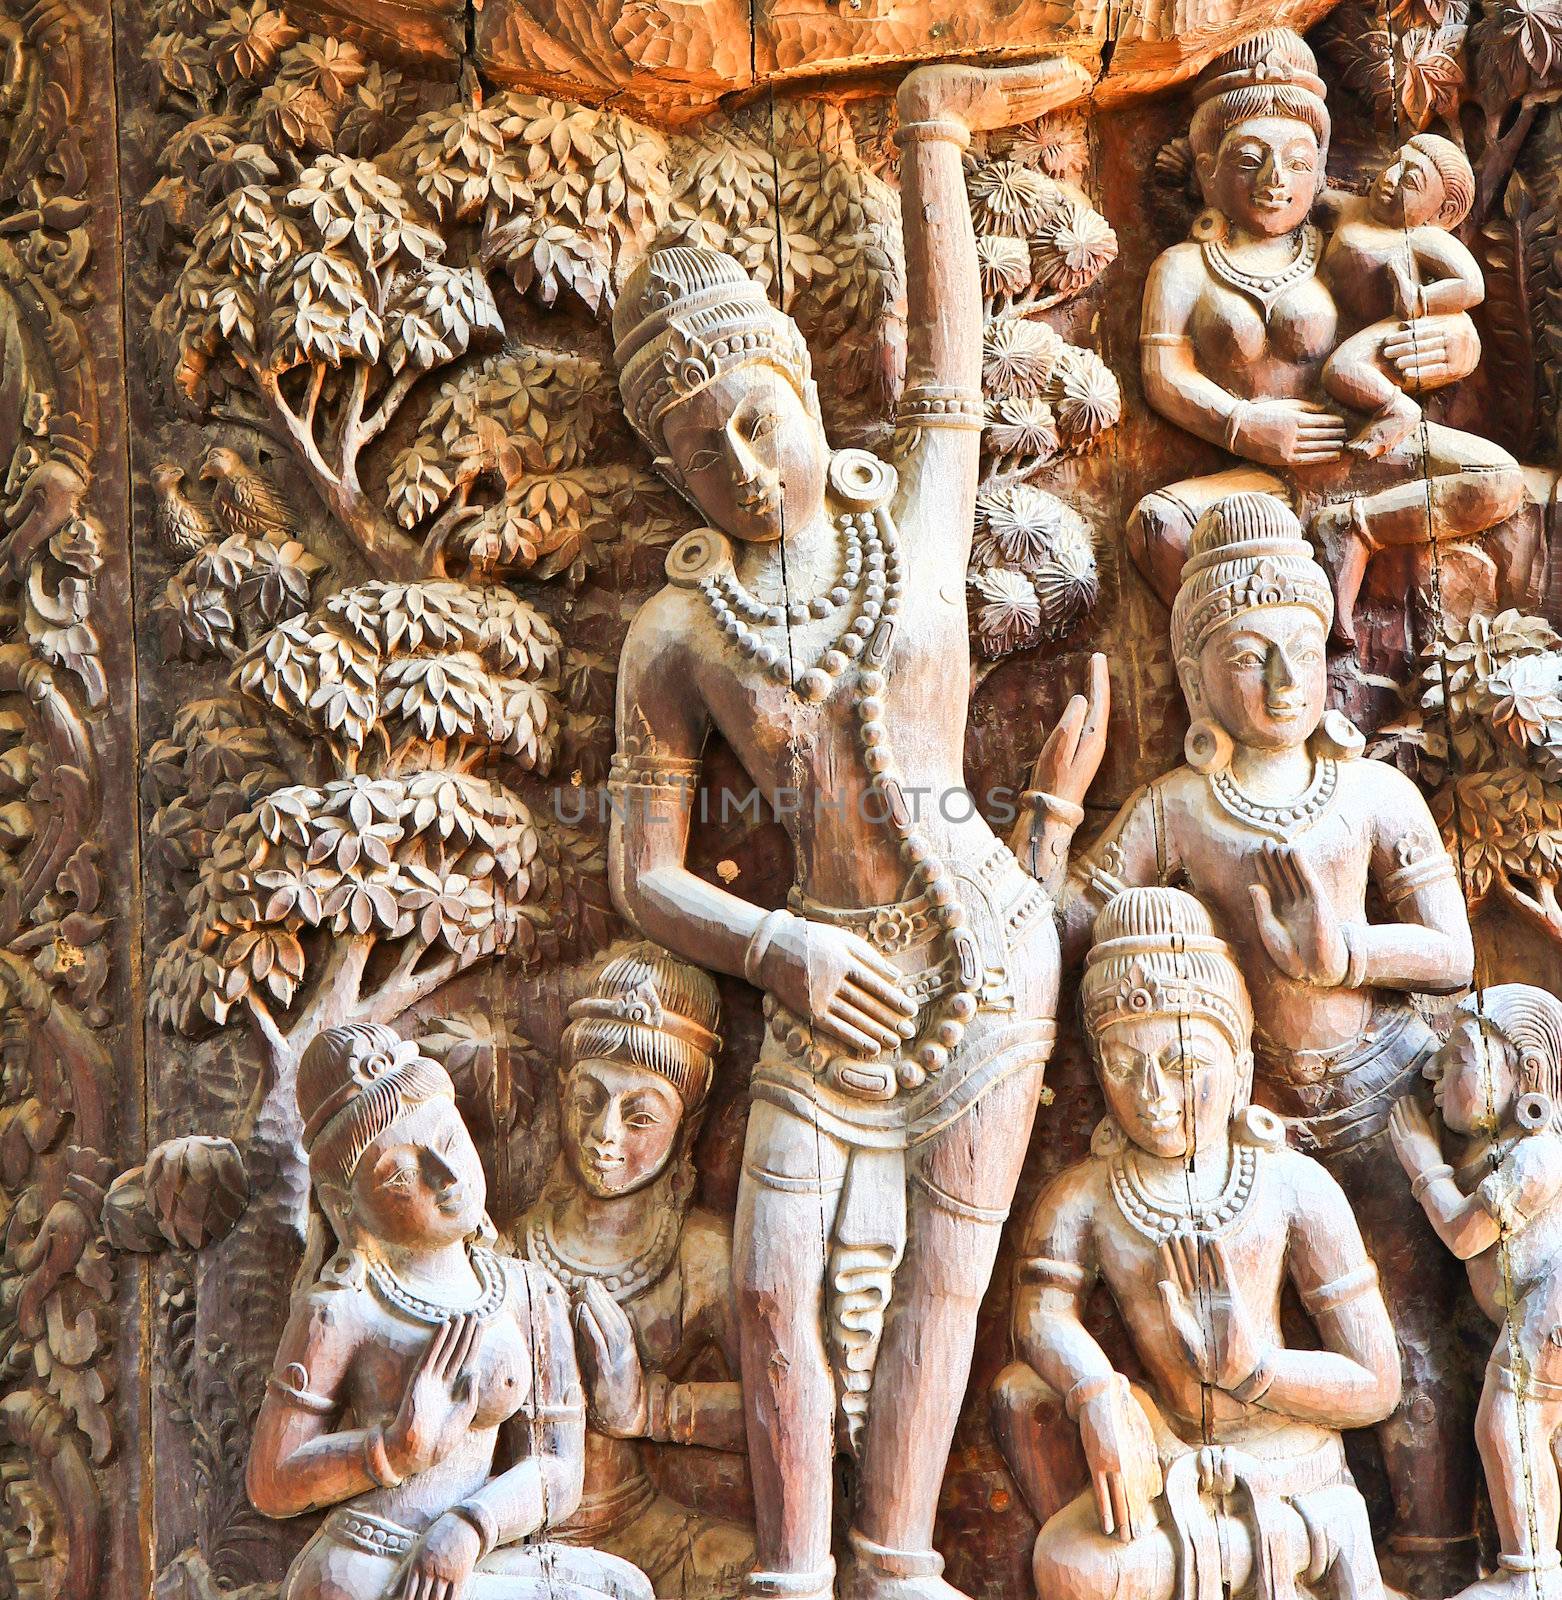 Wood carving Chonburi thailand by Photoguide